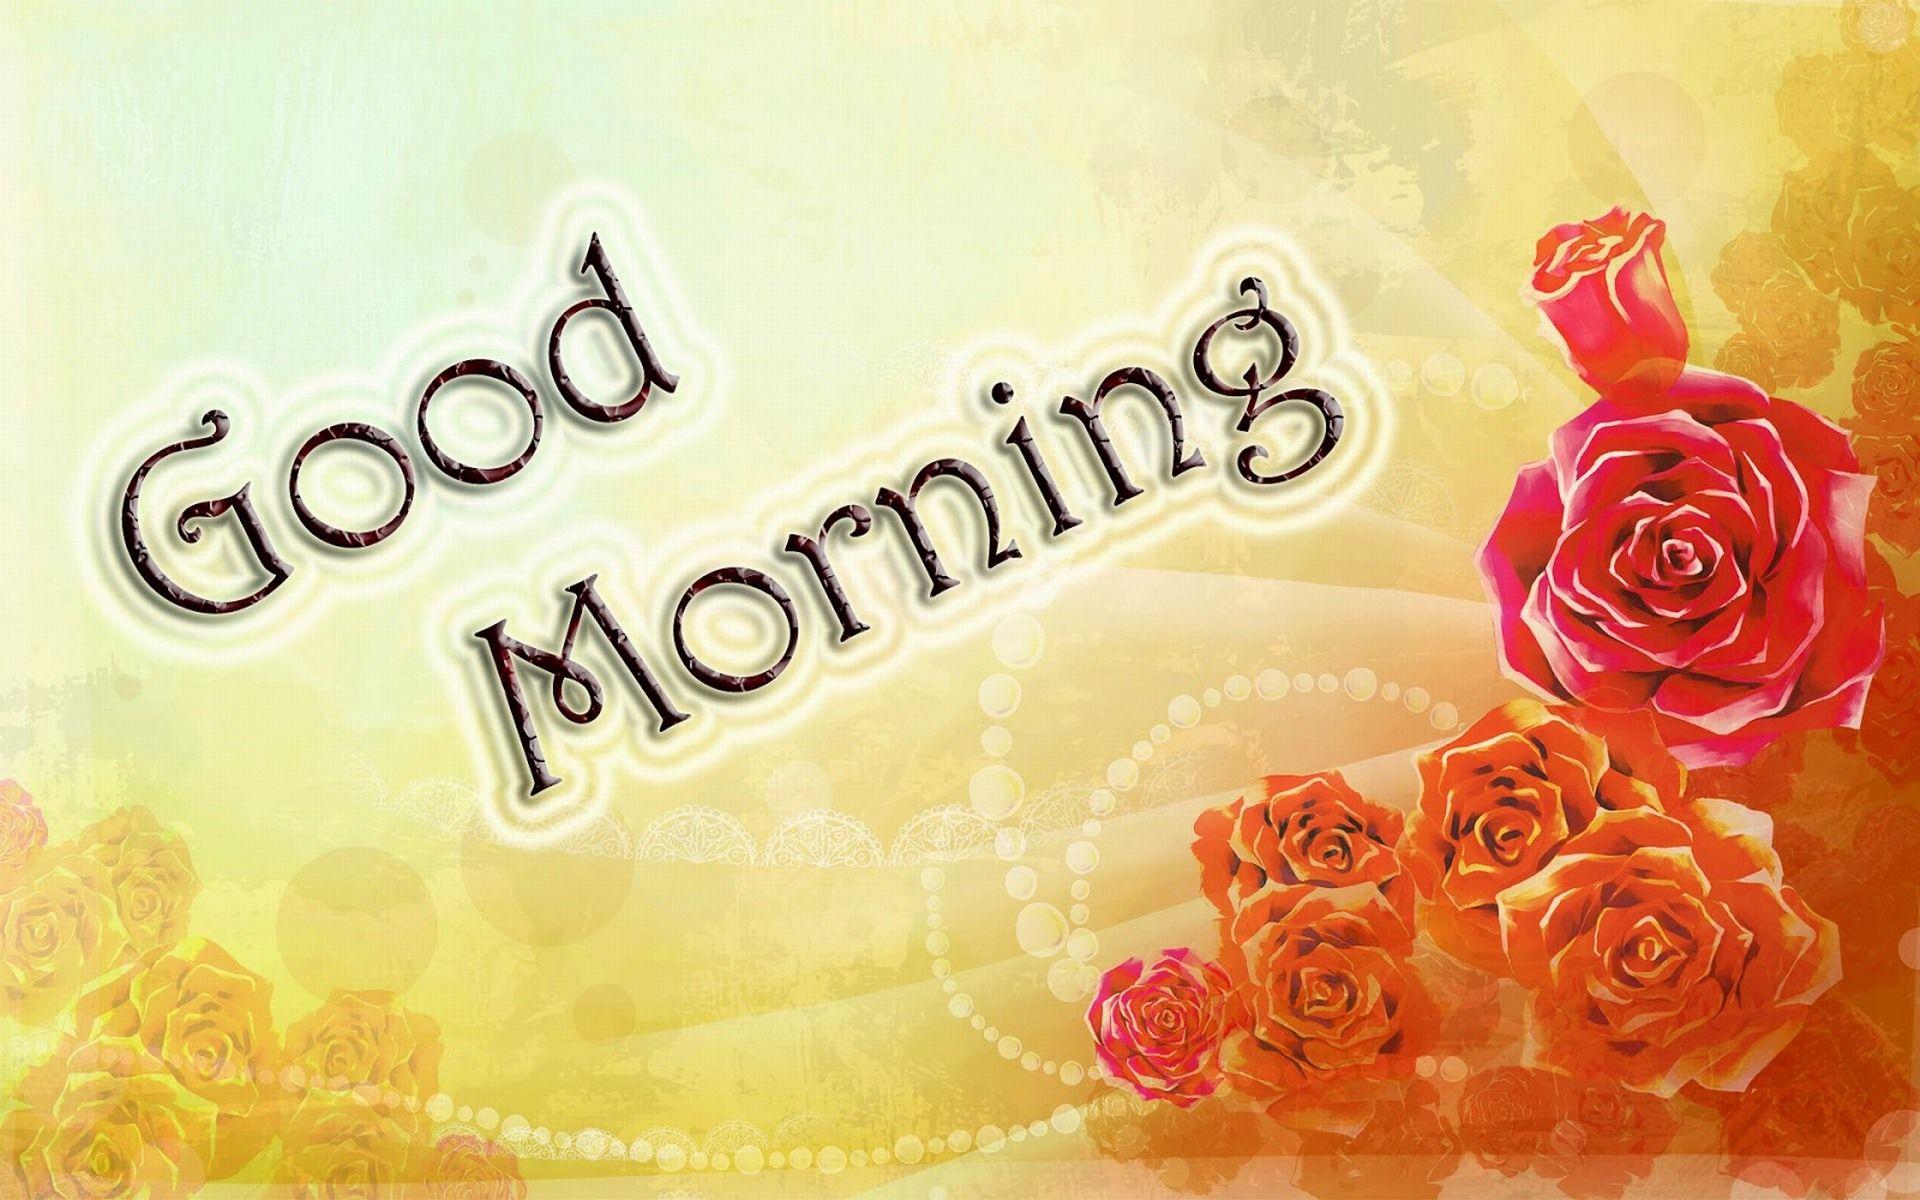 Good # morning all friend and have a nice day all and enjoy